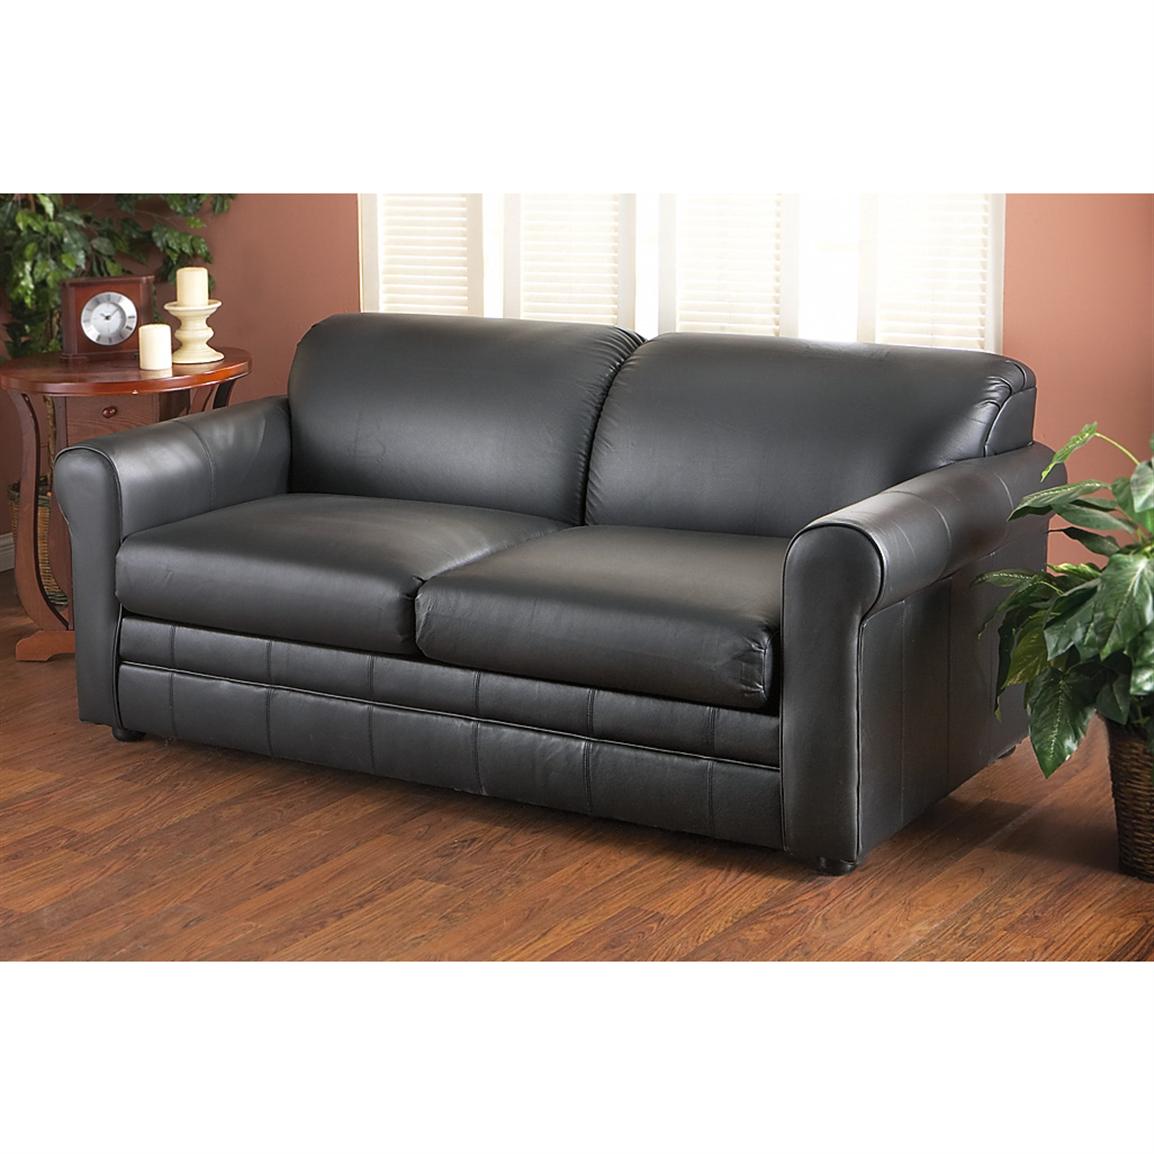 Queen Klaussner® Leather Sleeper Sofa - 142318, Living Room Furniture at Sportsman&#39;s Guide